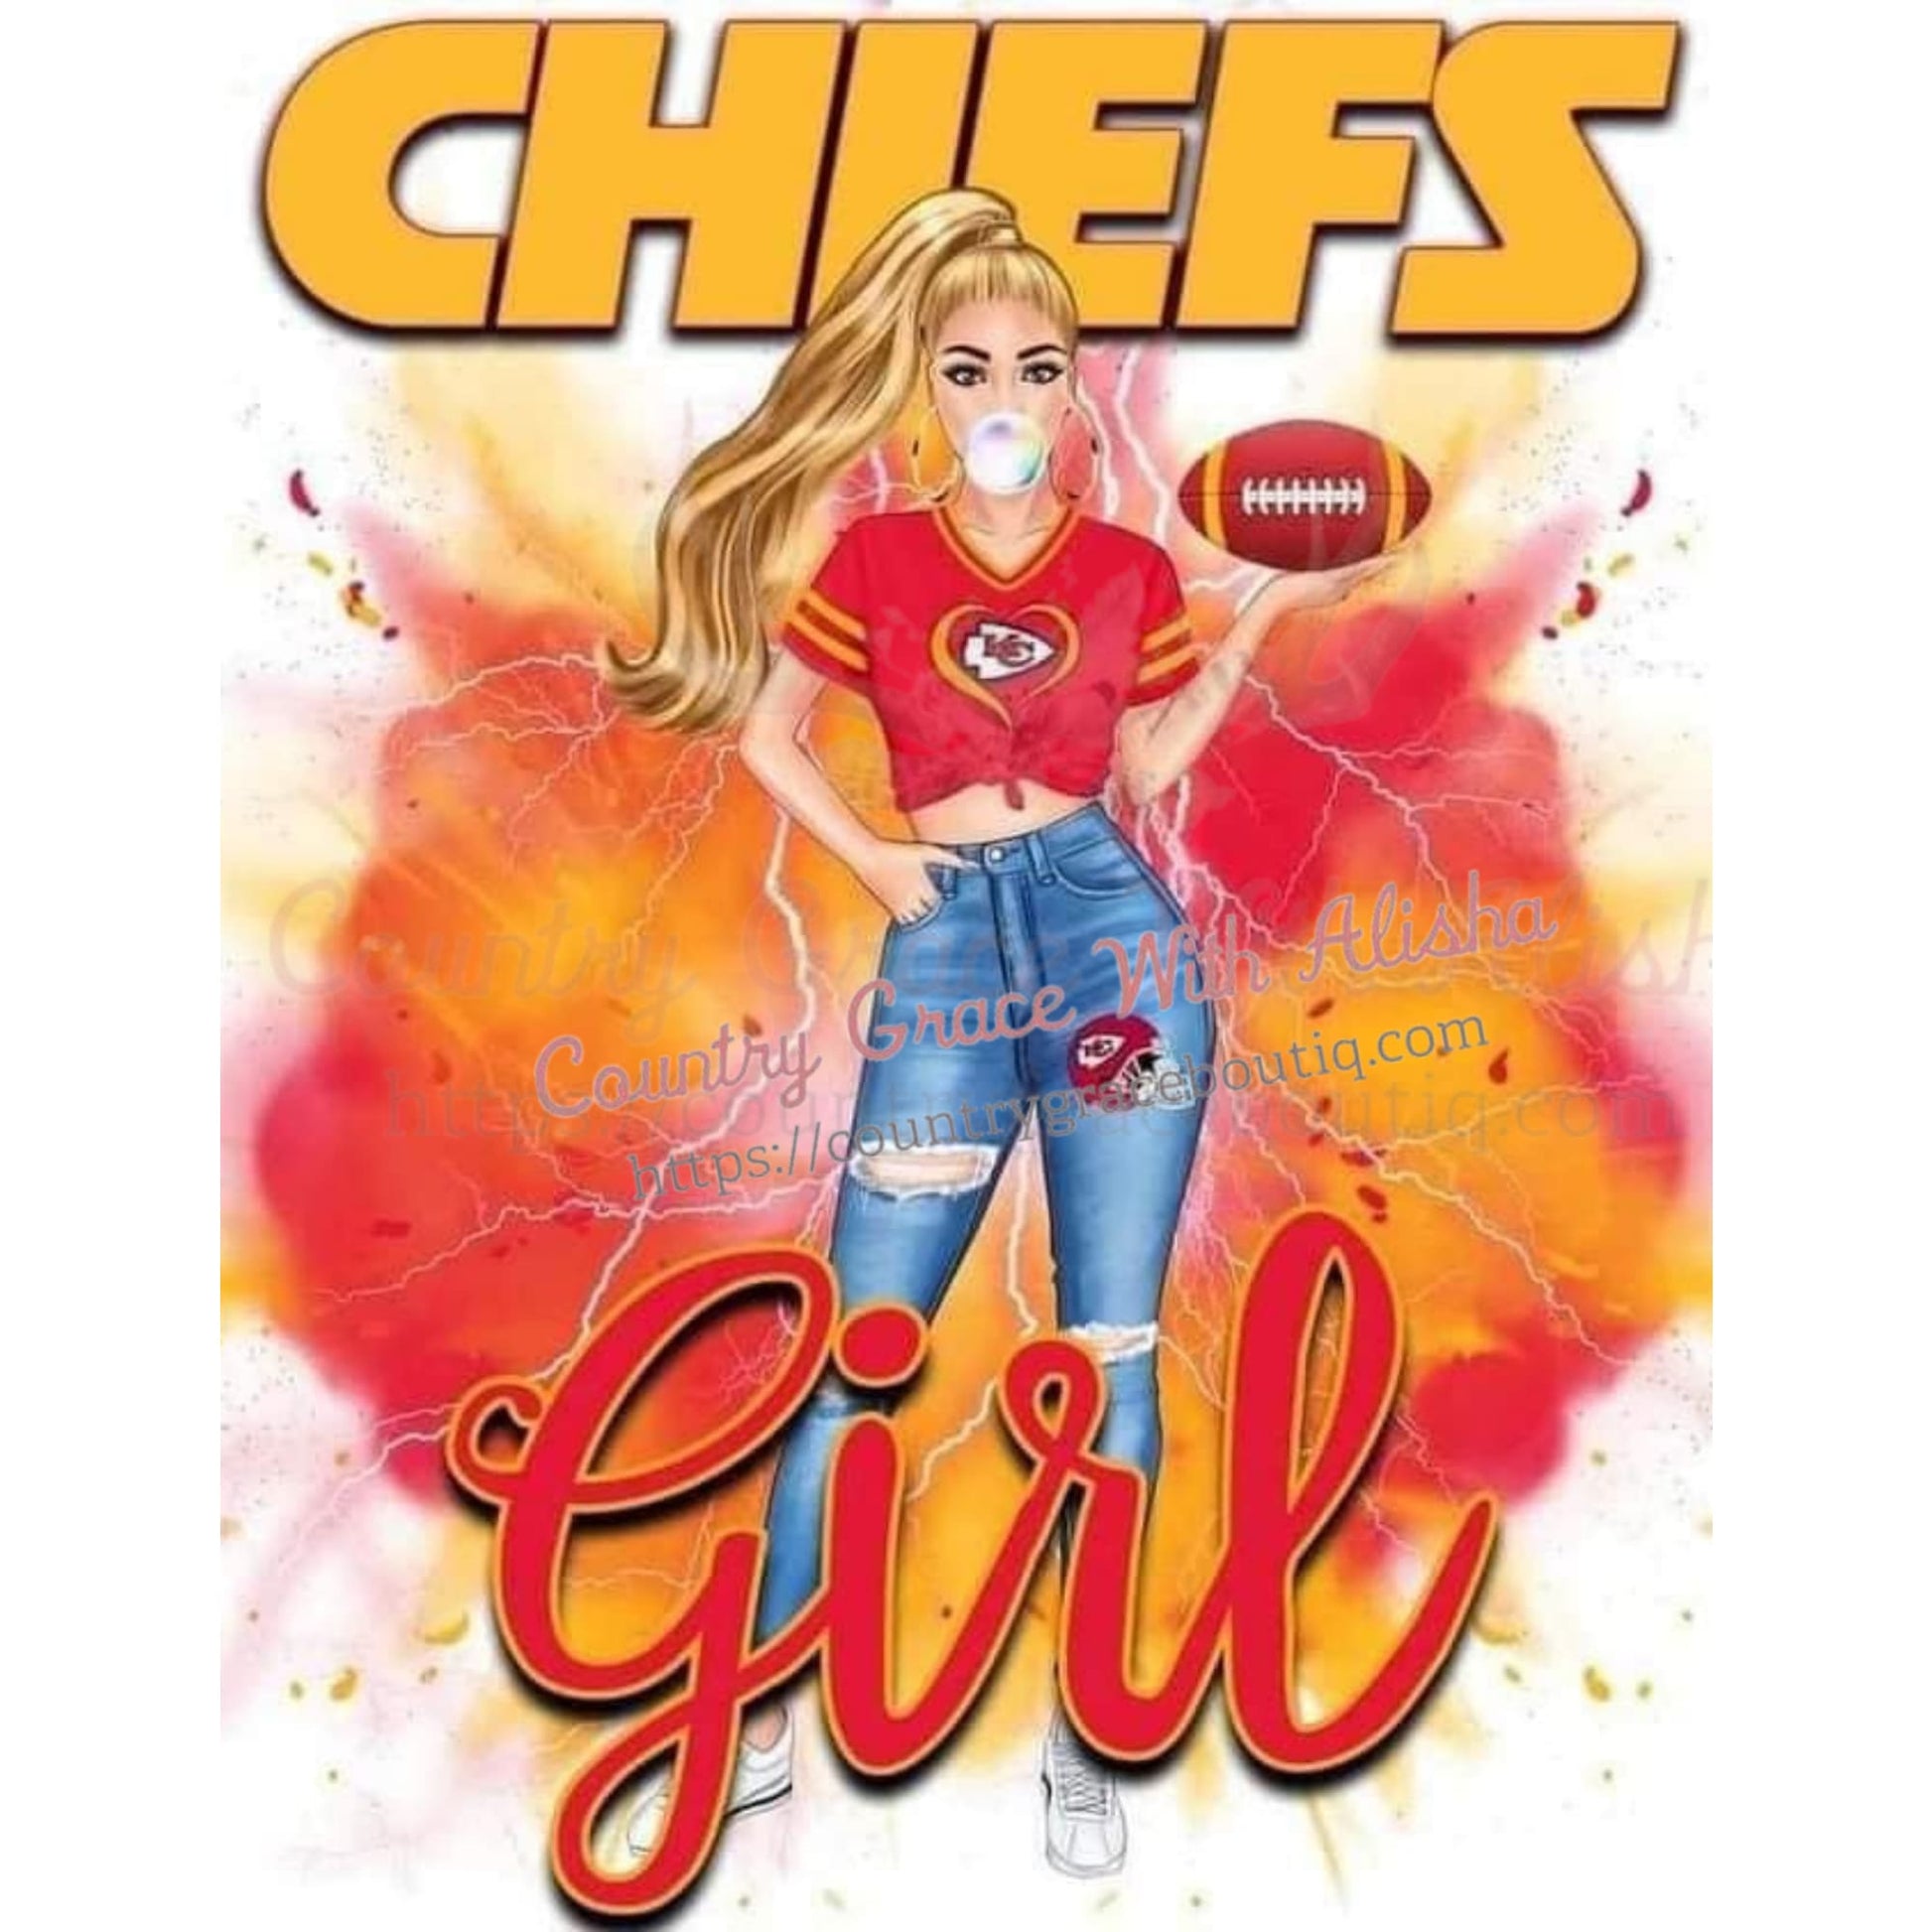 Chiefs Girl Ready To Press Sublimation Transfer - Sub $1.50 